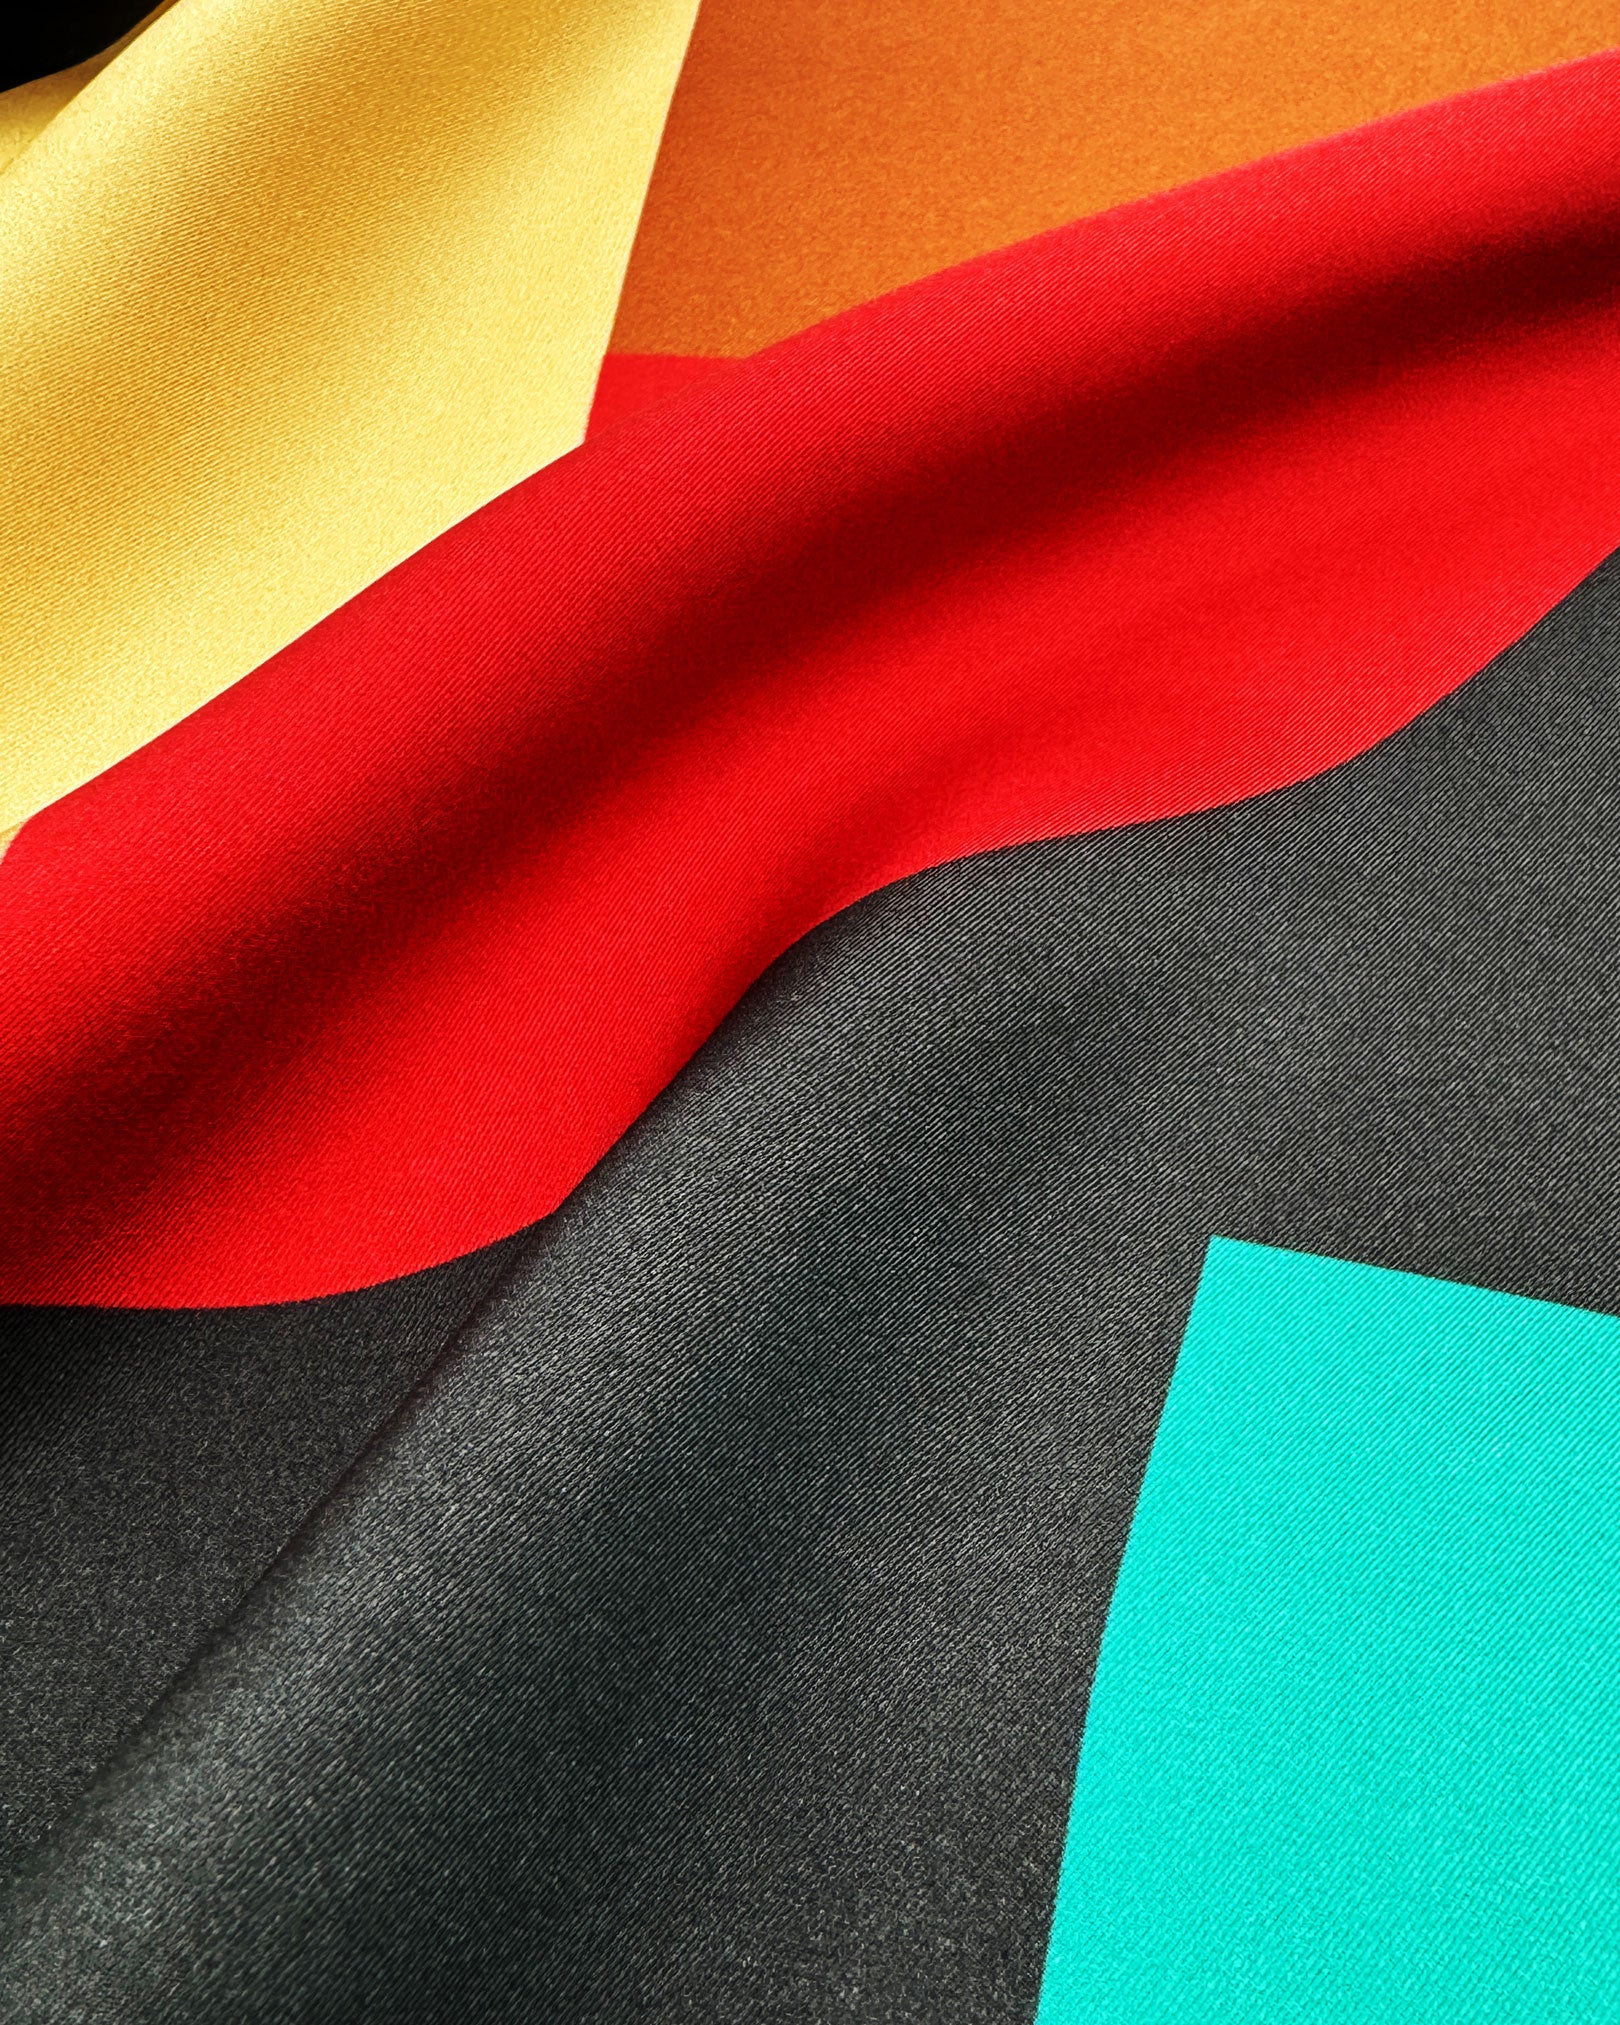 A ruffled close-up of the 'Berlin' silk neckerchief, presenting the interplay of the Bauhaus inspired palette.